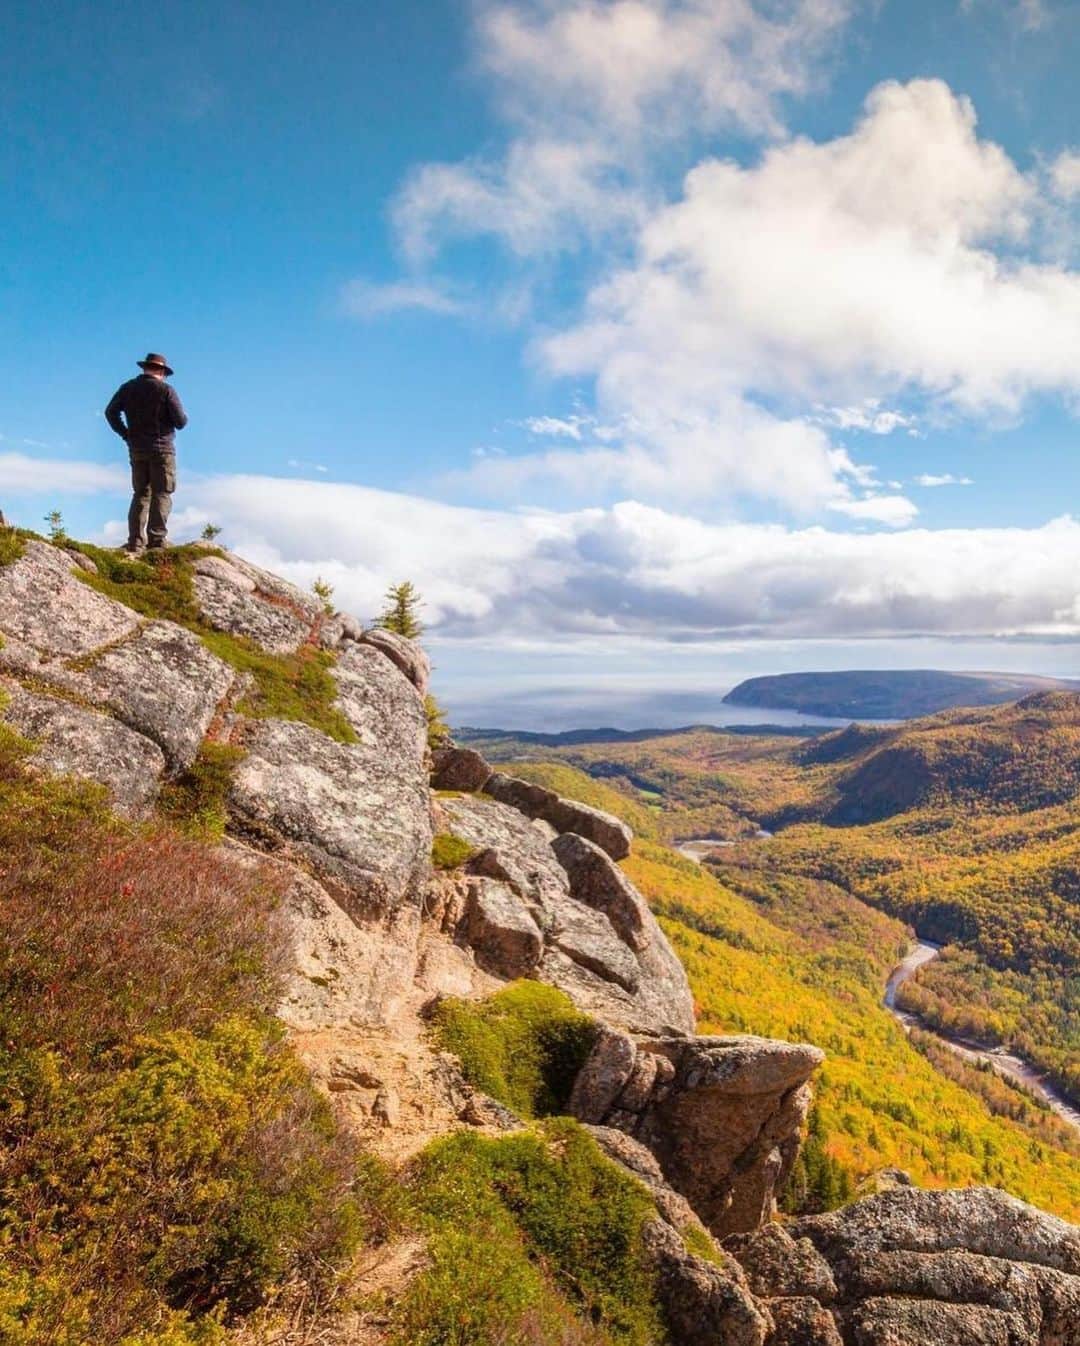 Explore Canadaさんのインスタグラム写真 - (Explore CanadaInstagram)「Today's #CanadaSpotlight is on hikes in Nova Scotia!⁠⠀ ⁠⠀ Whether it’s a clifftop trail with endless ocean views, a meandering footpath through old growth forests or a climb to the top of a highland mountaintop, Nova Scotia (@visitnovascotia) has it all. If you’re local to one of Canada’s Maritime provinces and looking to take a walk on the wild side this fall, here are some of our favourite hikes to enjoy:⁠⠀ ⁠⠀ 🍁 Skyline Trail, Cape Breton Highlands National Park. With breathtaking views and an abundance of wildlife, it’s easy to see why this trail is so well-loved by those who walk it.⁠⠀ 🍃 Balancing Rock Trail. This 2.5km trail leads to a narrow, vertical column of basalt balancing on its tip! ⁠⠀ 🌊 Cape Split Provincial Park Reserve. This incredible out-and-back trail  is perfect for enjoying a picnic with a stunning ocean view!⁠⠀ 🍂 Franey Trail, Cape Breton Highlands National Park. One of 26 scneic trails in this national park, this hike is challenging but worth the 360-degree views of the Clyburn Brook canyon.⁠⠀ 💡 Louisbourg Lighthouse Trail. A shorter trail that still packs a punch with impressive views of the Fortress of Louisbourg. You’ll also find interpretive panels along the route, with information on local flora and fauna, as well as areas of significance. ⁠⠀ ⁠⠀ Head over to @visitnovascotia for more inspiring photos and updates!⁠⠀ ⁠⠀ #ExploreCanada #ForGlowingHearts⁠⠀ ⁠⠀ *Know before you go! Check the most up-to-date travel restrictions and border closures before planning your trip.*⁠⠀ ⁠⠀ 📷: ⁠⠀ ⁠⠀ 1. @daveyandsky ⁠⠀ 2. @visitnovascotia⁠⠀ 3. @lenwagg_photo⁠⠀ 4. @acorn_art_photography (2)⁠⠀ 5. @maximilian_kauss⁠⠀ ⁠⠀ 📍: @visitnovascotia⁠⠀ ⁠⠀ #VisitNovaScotia」9月11日 5時02分 - explorecanada